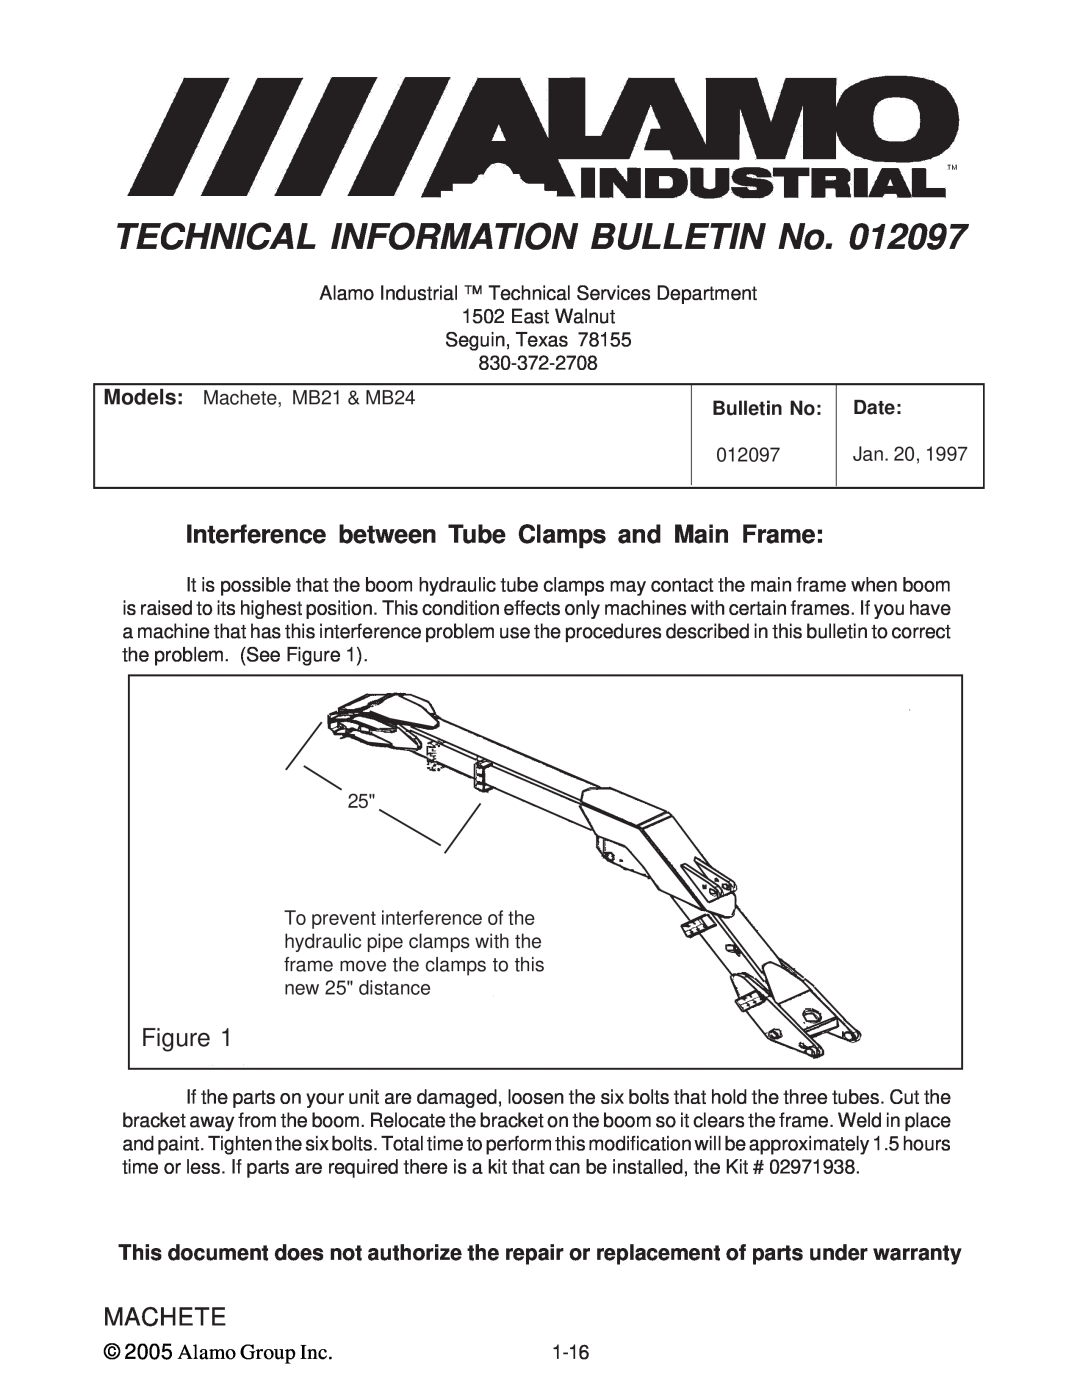 Alamo T 7740 Interference between Tube Clamps and Main Frame, TECHNICAL INFORMATION BULLETIN No, Figure, Machete, Date 